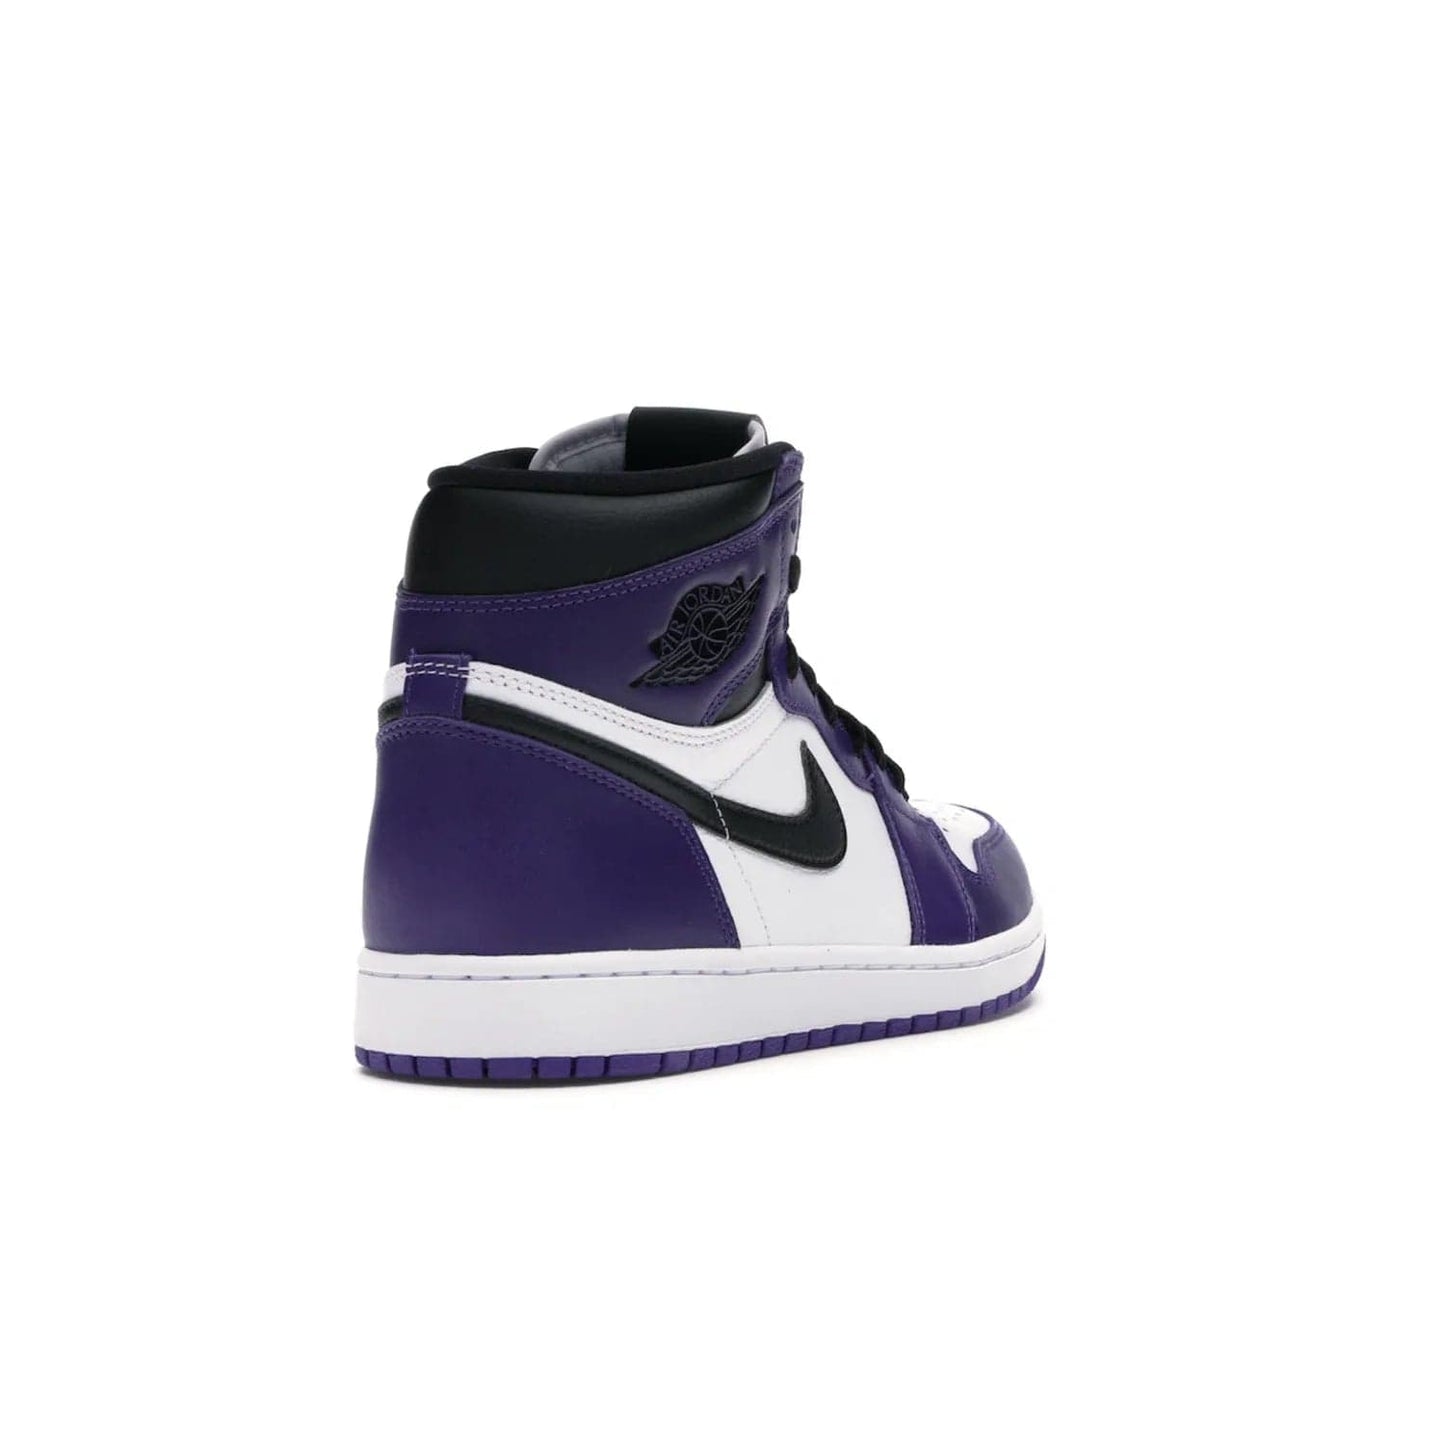 Jordan 1 Retro High Court Purple White - Image 31 - Only at www.BallersClubKickz.com - Grab the classic Jordan 1 Retro High Court Purple White and add major flavor to your collection. White leather upper with Court Purple overlays and Swoosh logo. White midsole and purple outsole. Get yours and rep your Jordan Brand.